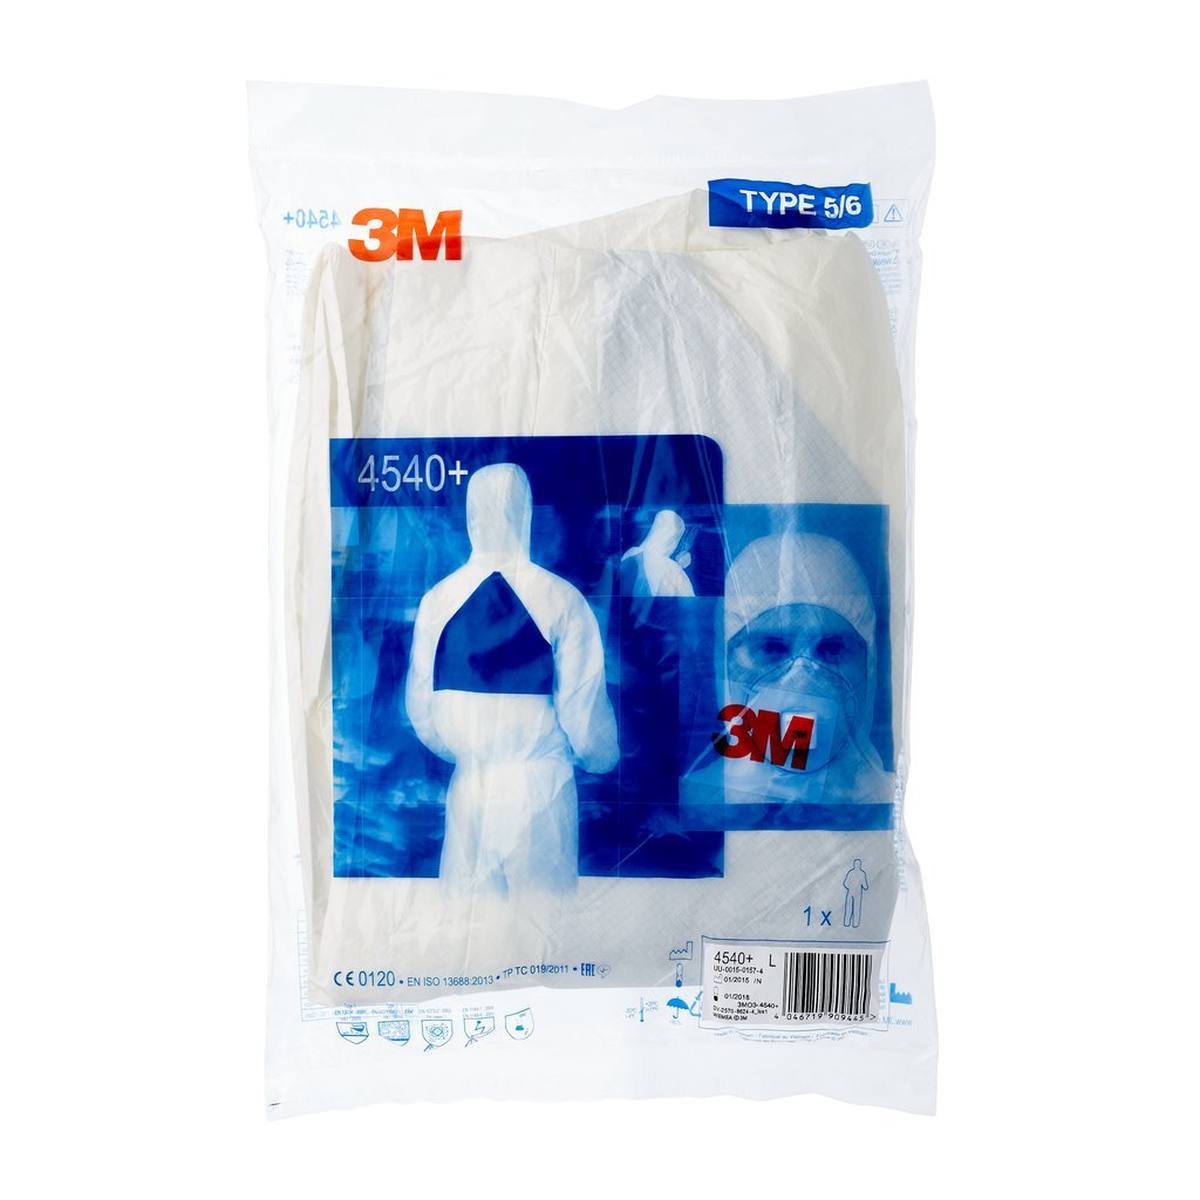 3M 4540+ coverall, white+blue, type 5/6, size 3XL, robust, lint-free, reinforced seams, SMMMS material, breathable, detachable zipper, knitted cuffs